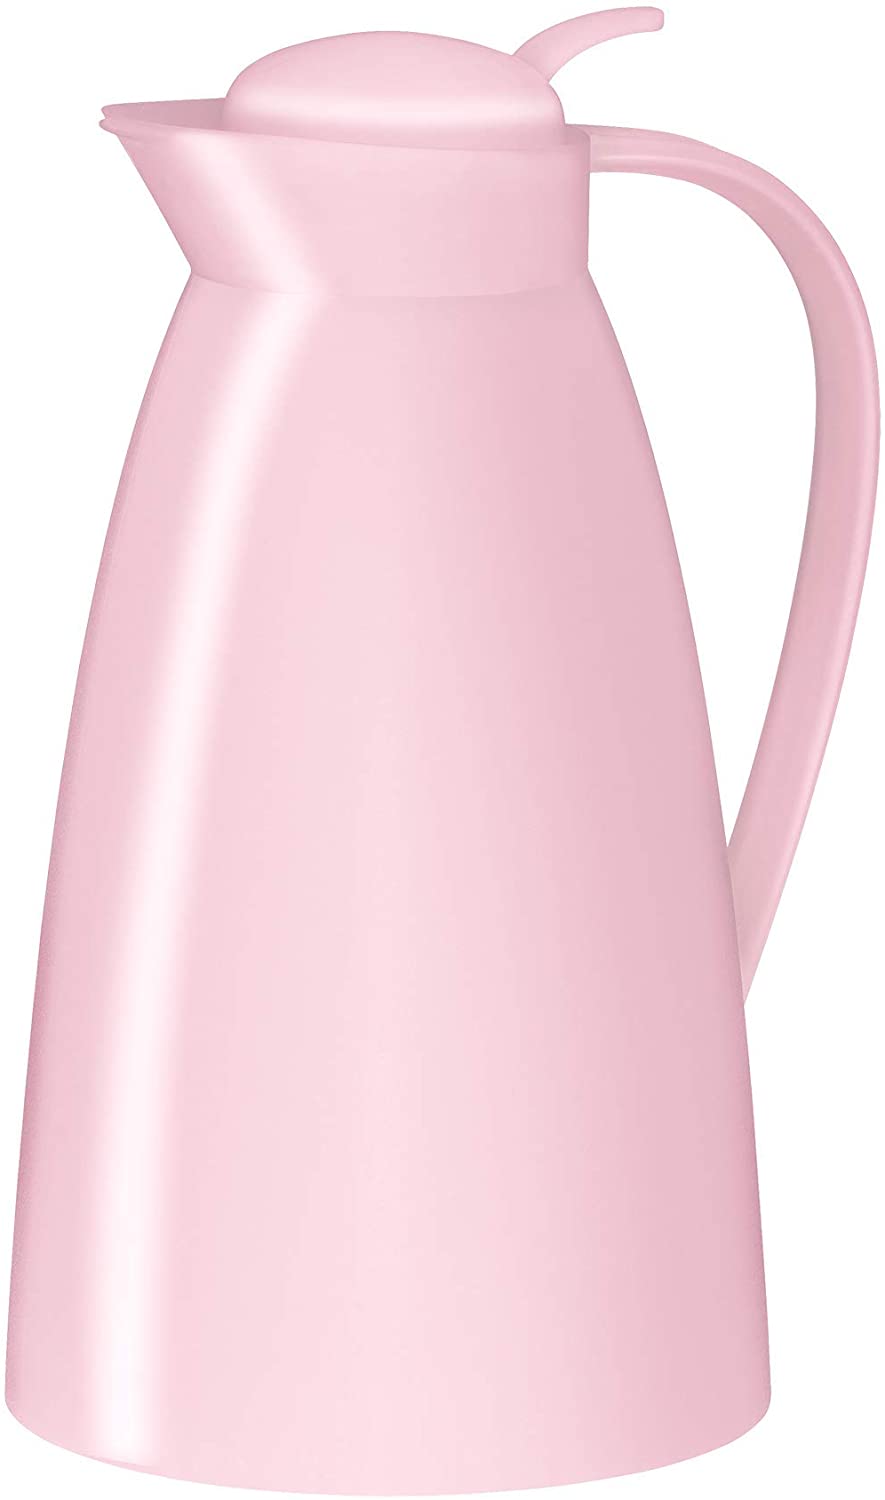 alfi 0825.010.100 Eco Vacuum Flask, Frosted Plastic, 1.0 Litre - Keeps Hot for 12 Hours or Cold for 24 Hours